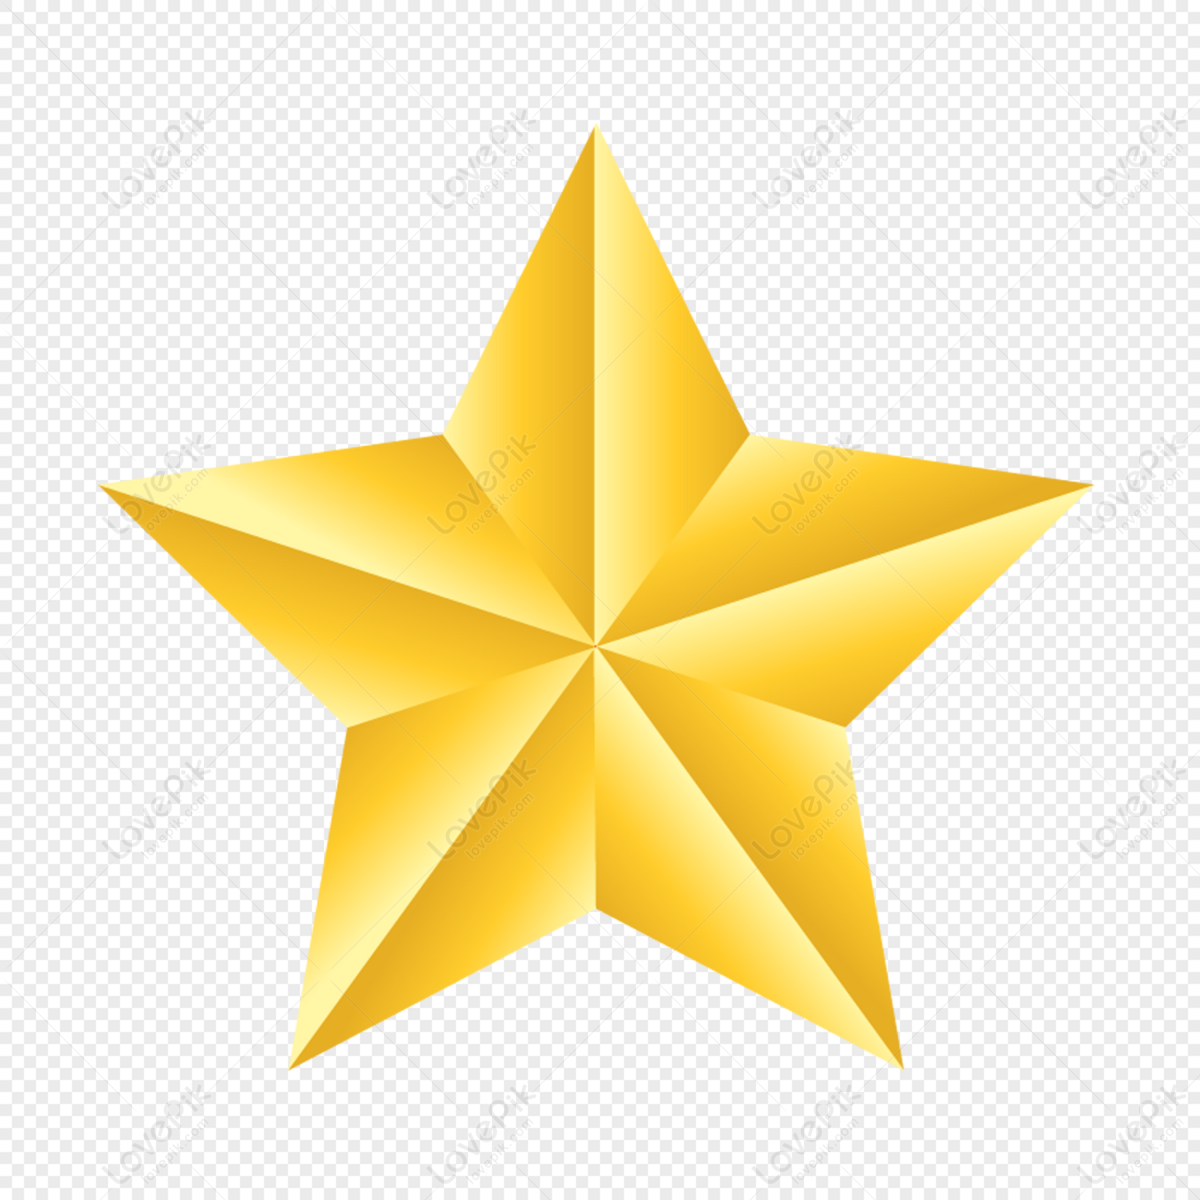 five-pointed-star-five-star-picture-stars-png-transparent-background